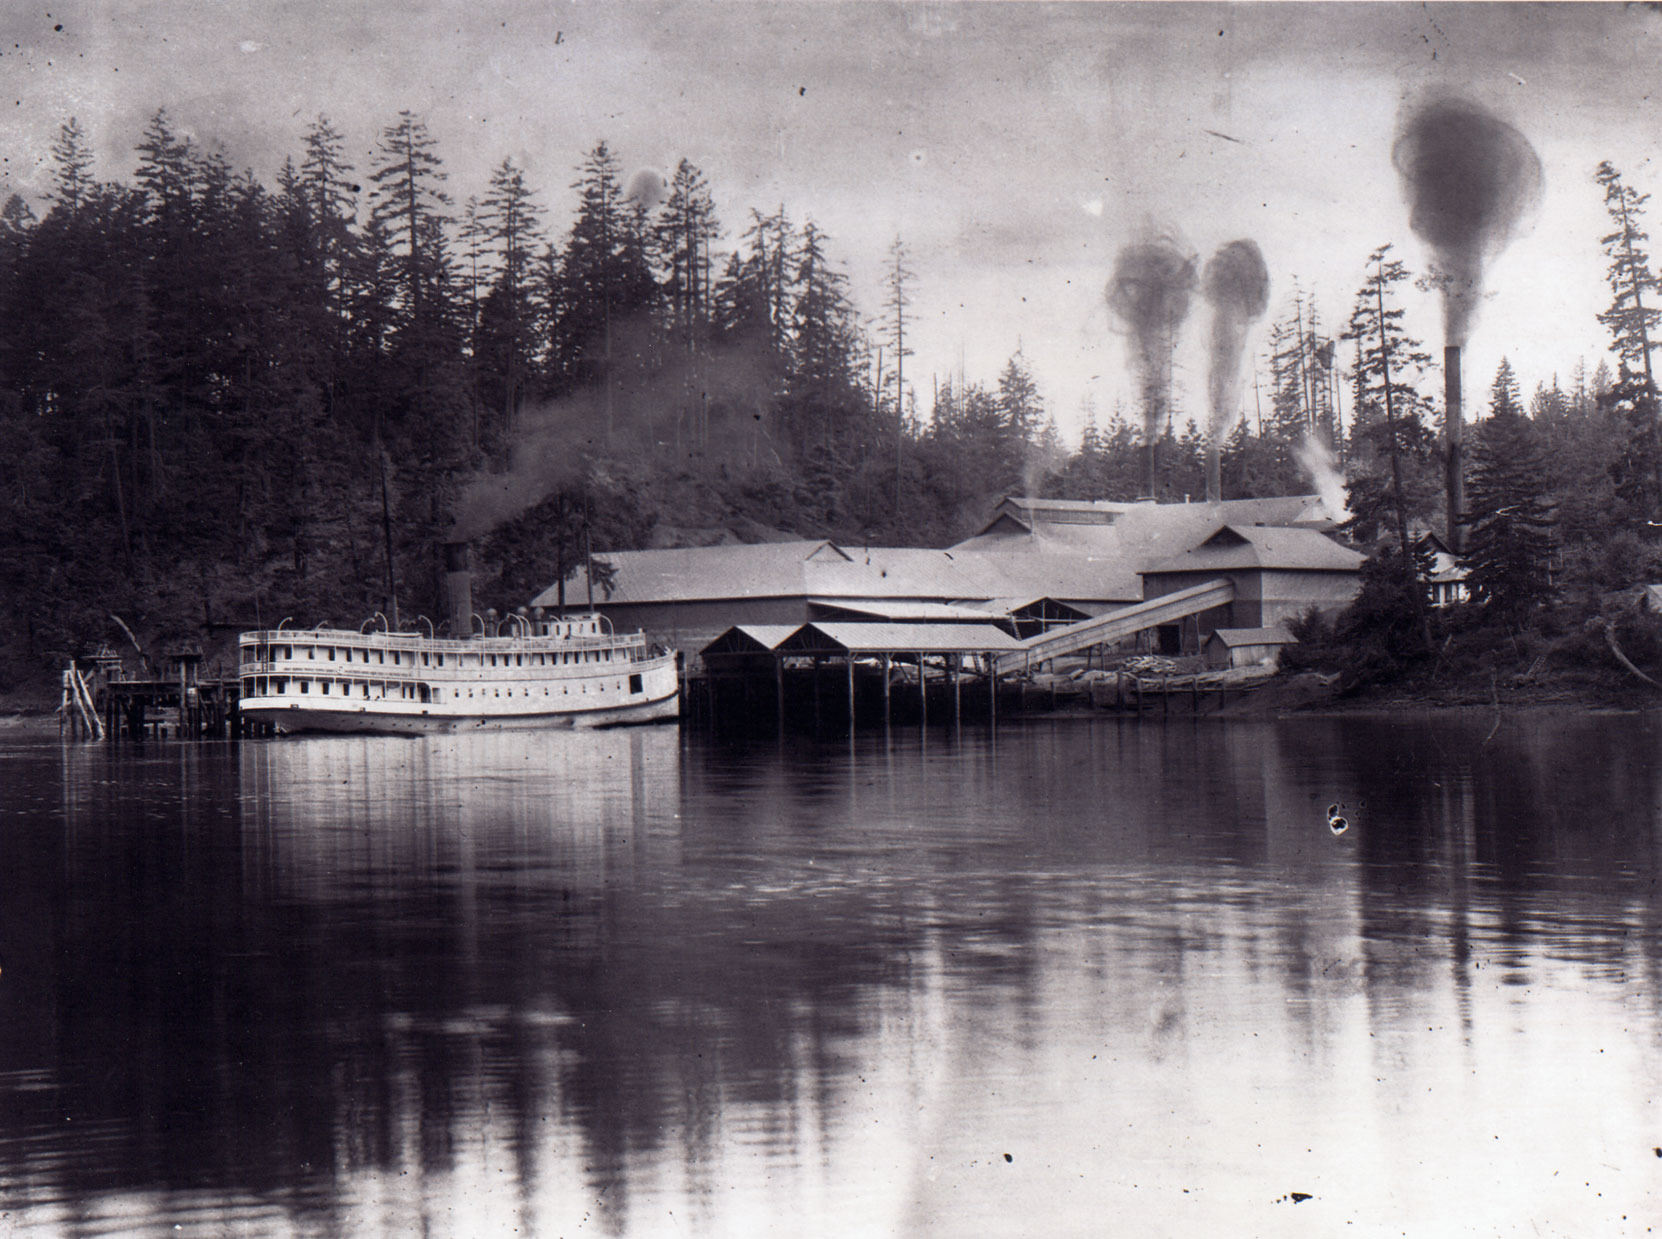 The CPR steamer Charmer at the Vancouver Portland Cement Company wharf, Tod Inlet, circa 1908 (BC Archives photo A-00024)